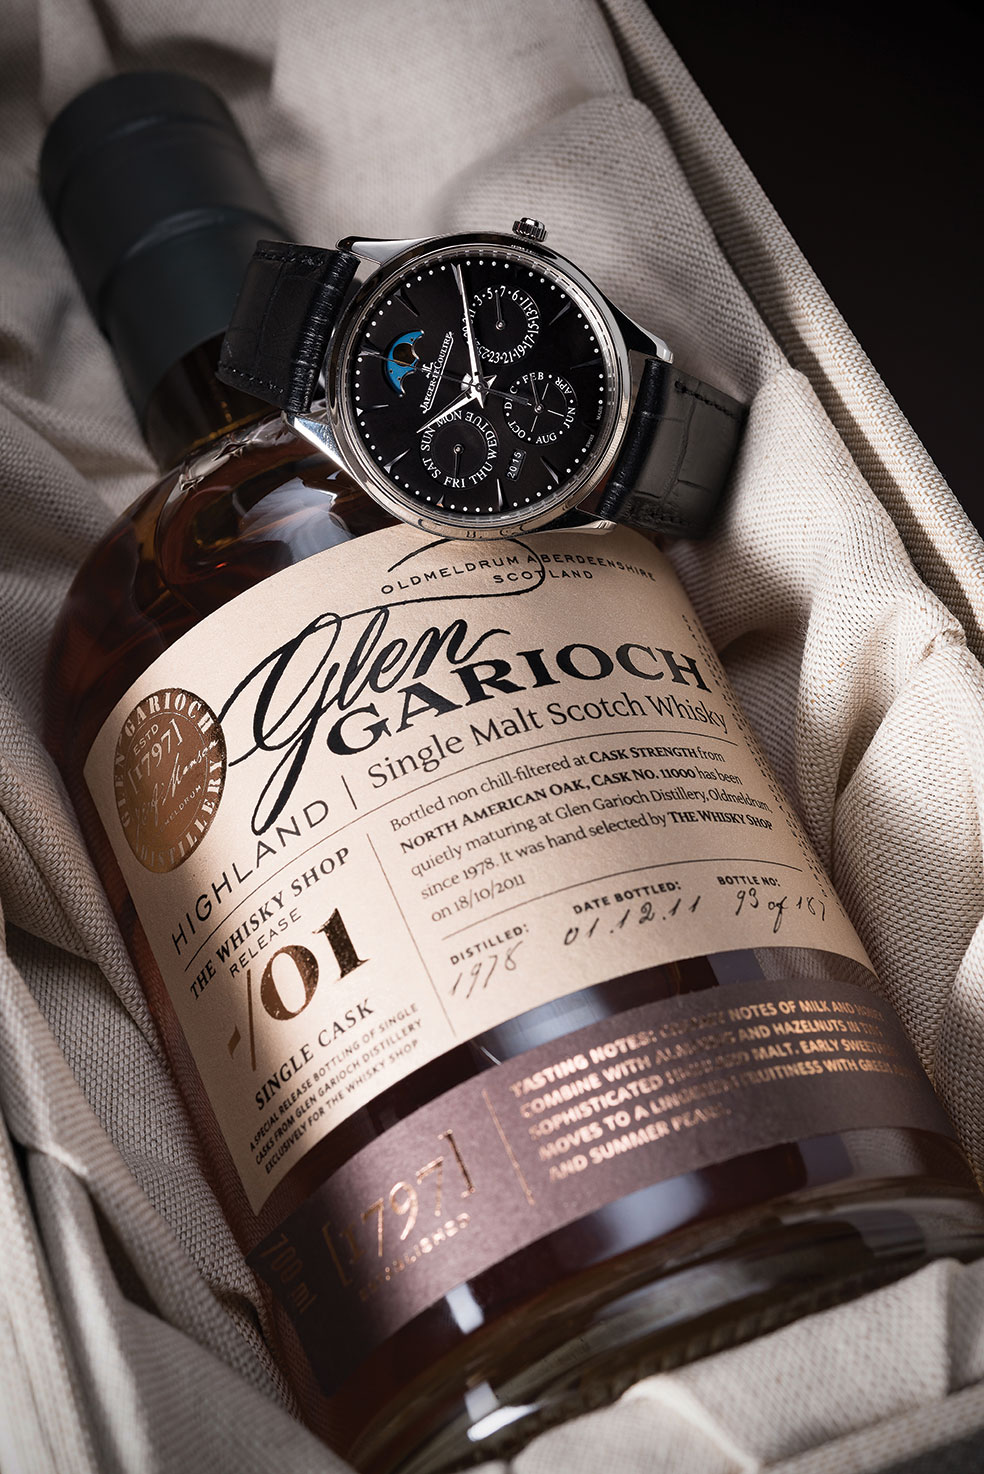 Watches and Whisky: Spring 2016